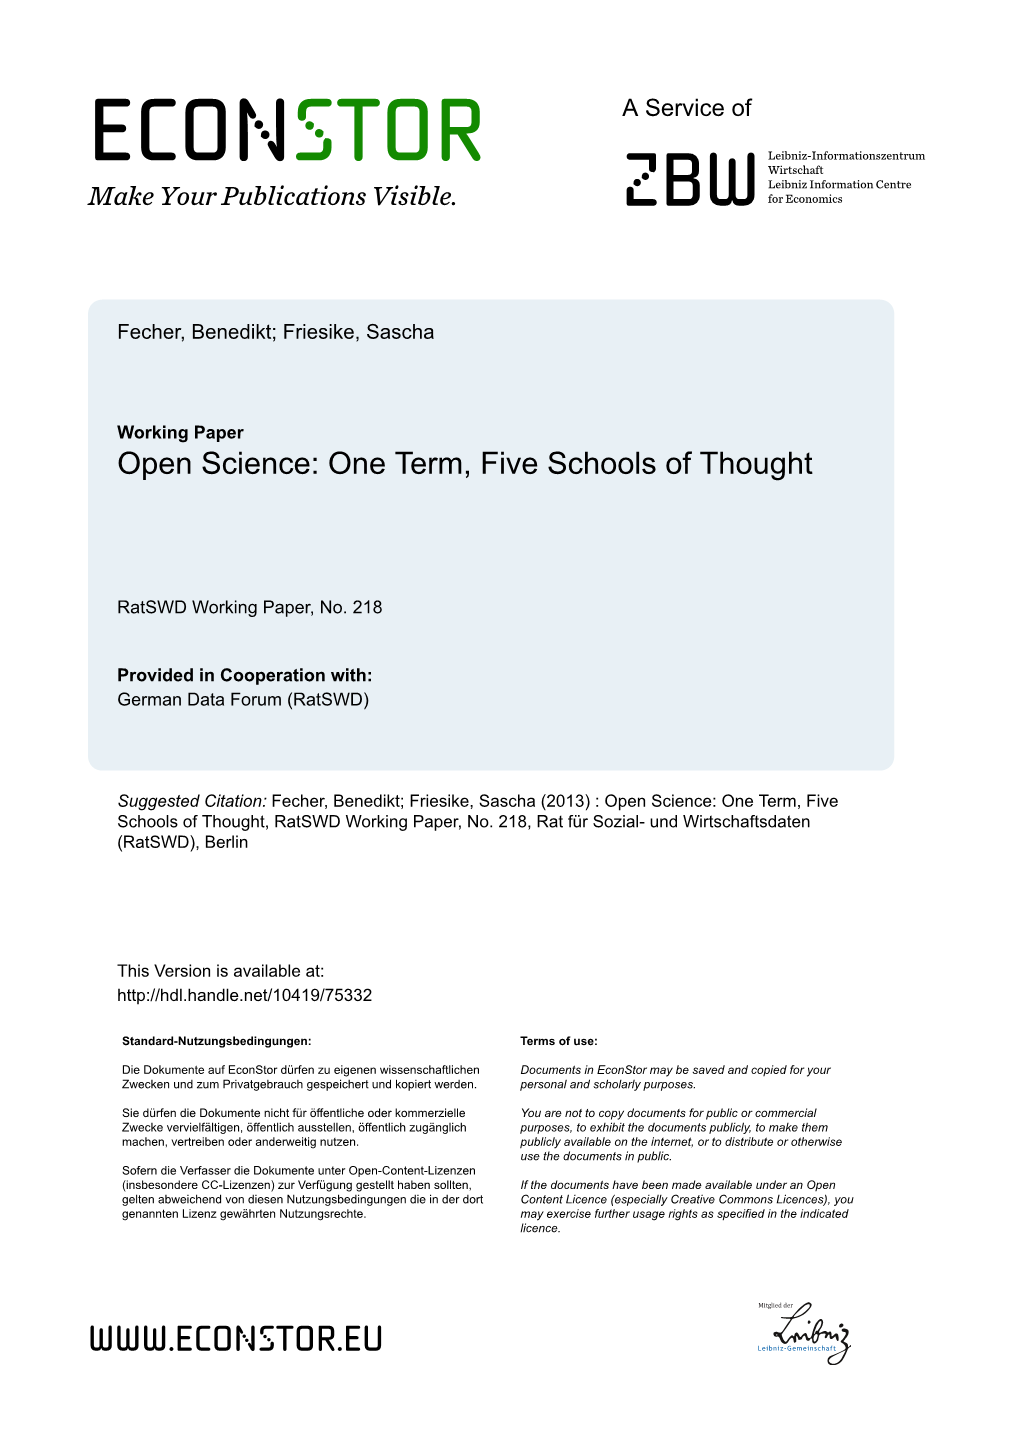 Open Science: One Term, Five Schools of Thought